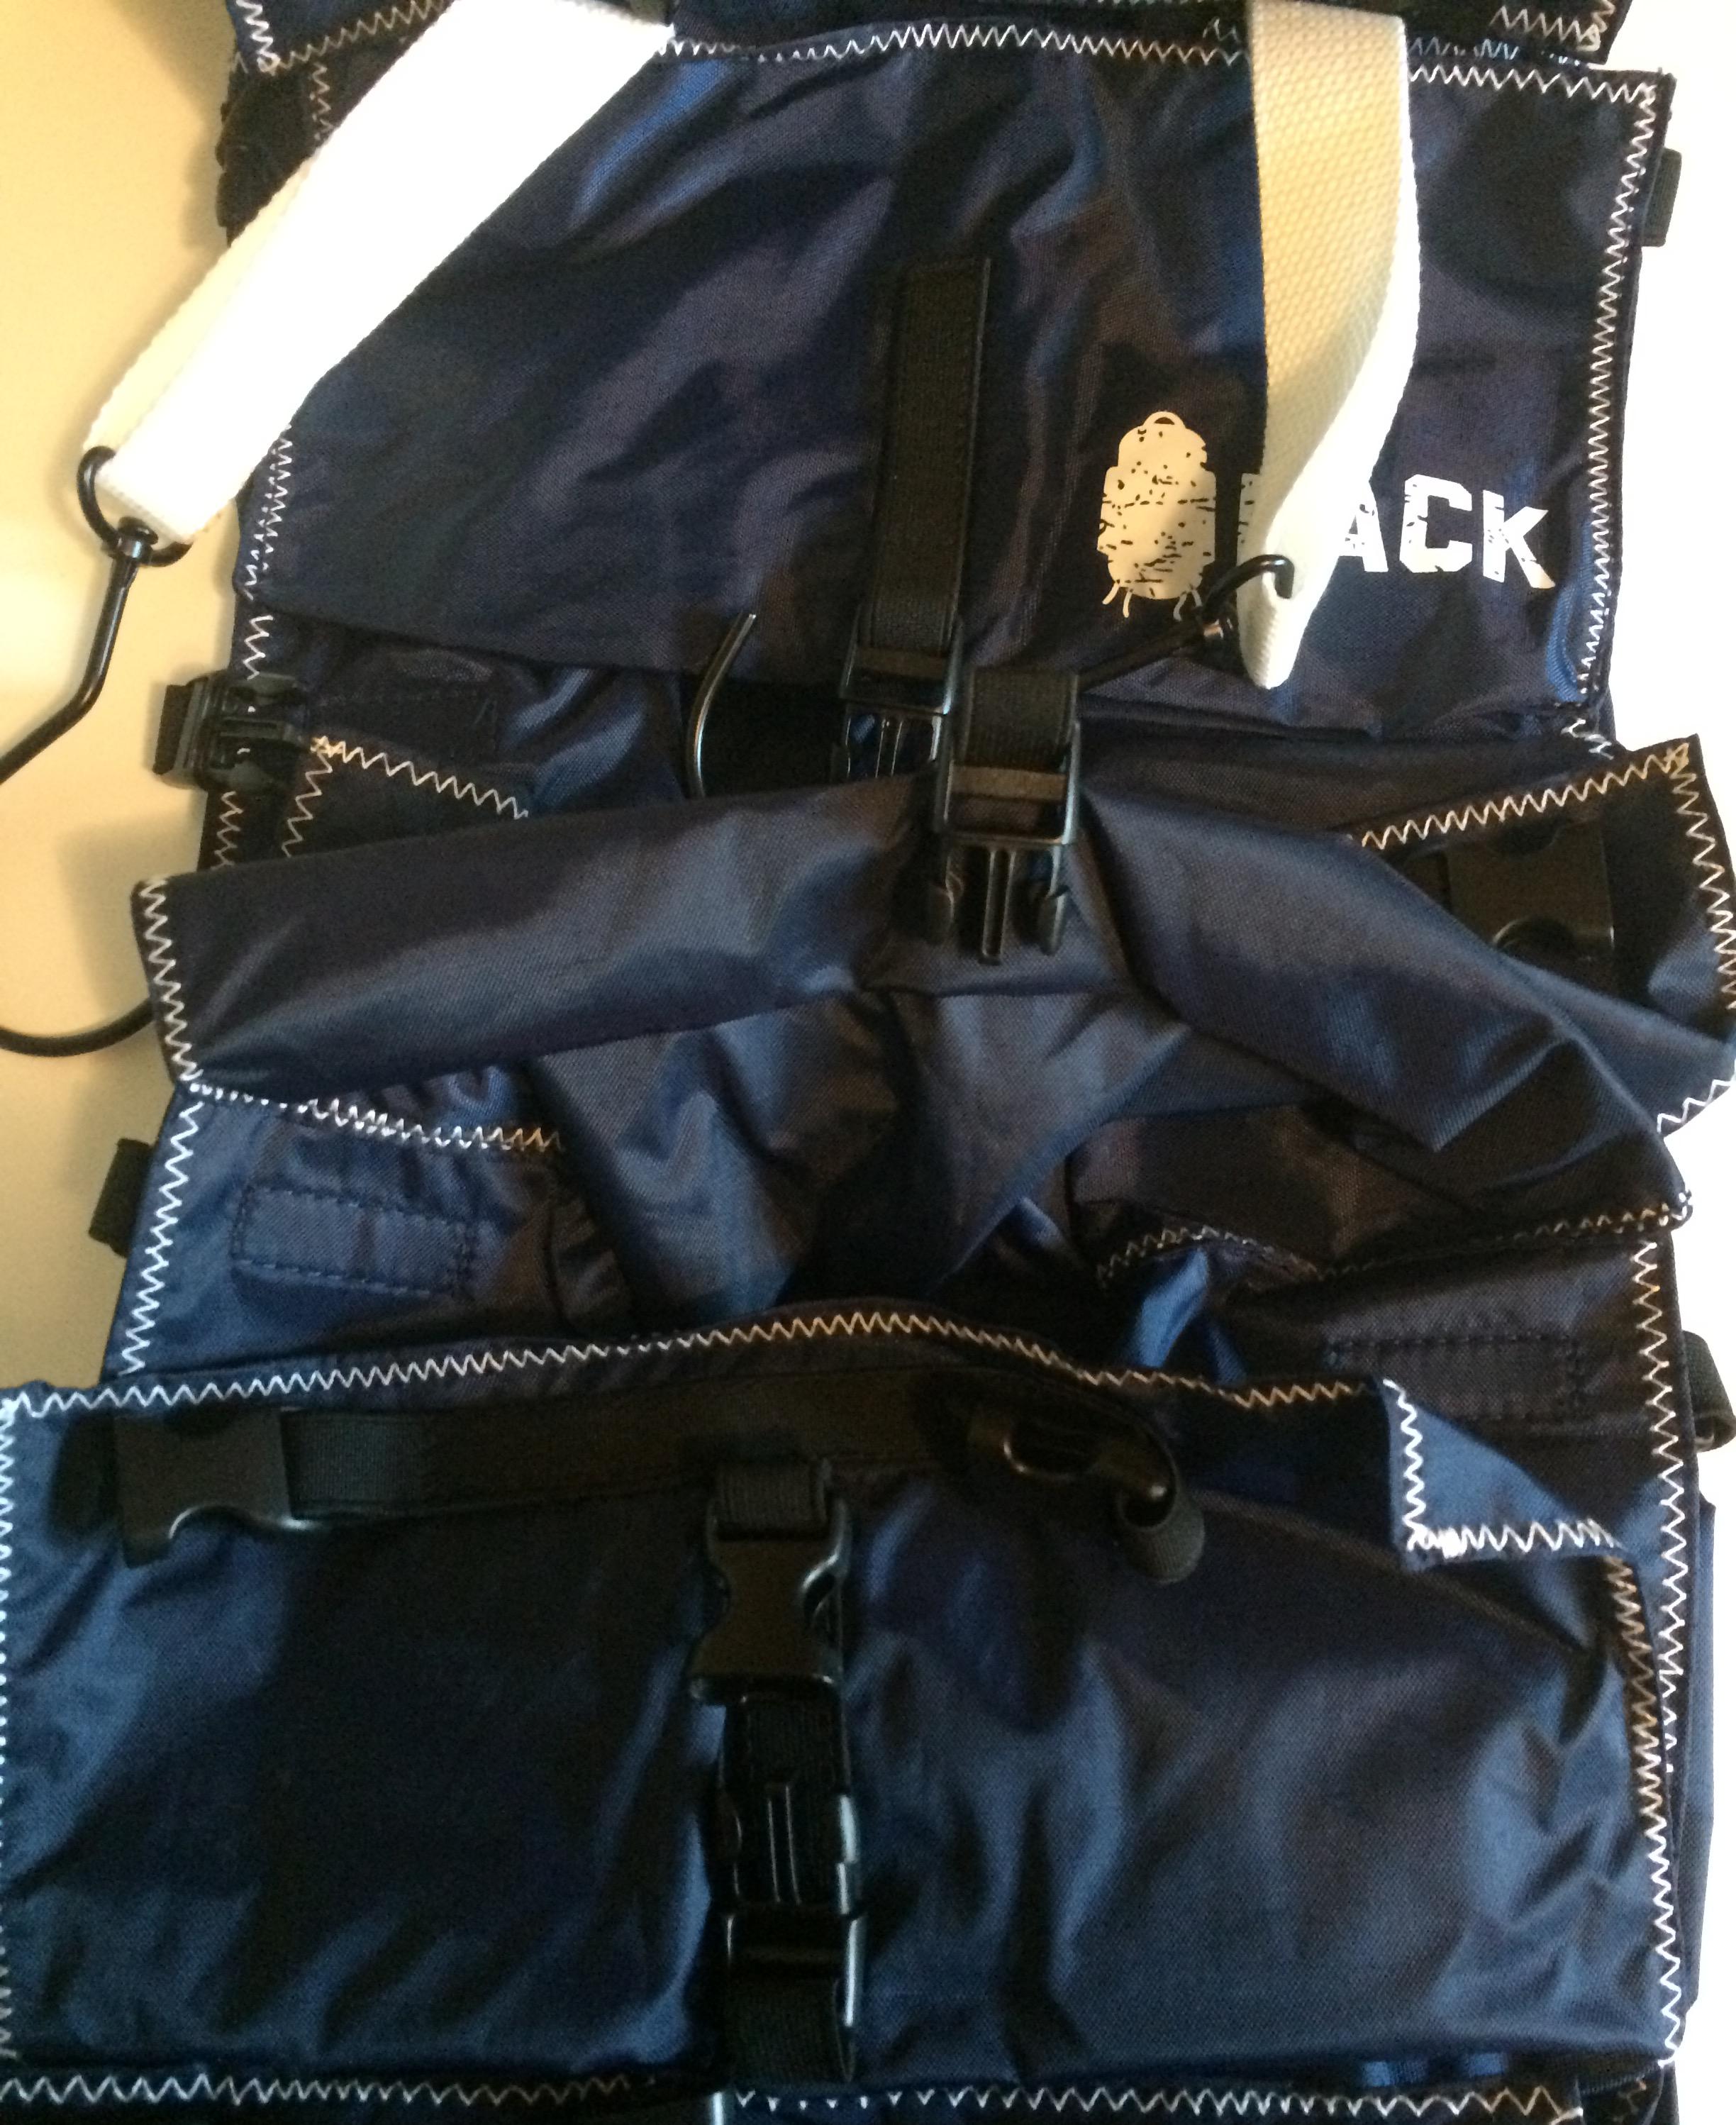 The PACK Gear Travel Organizer Review - Going Awesome Places